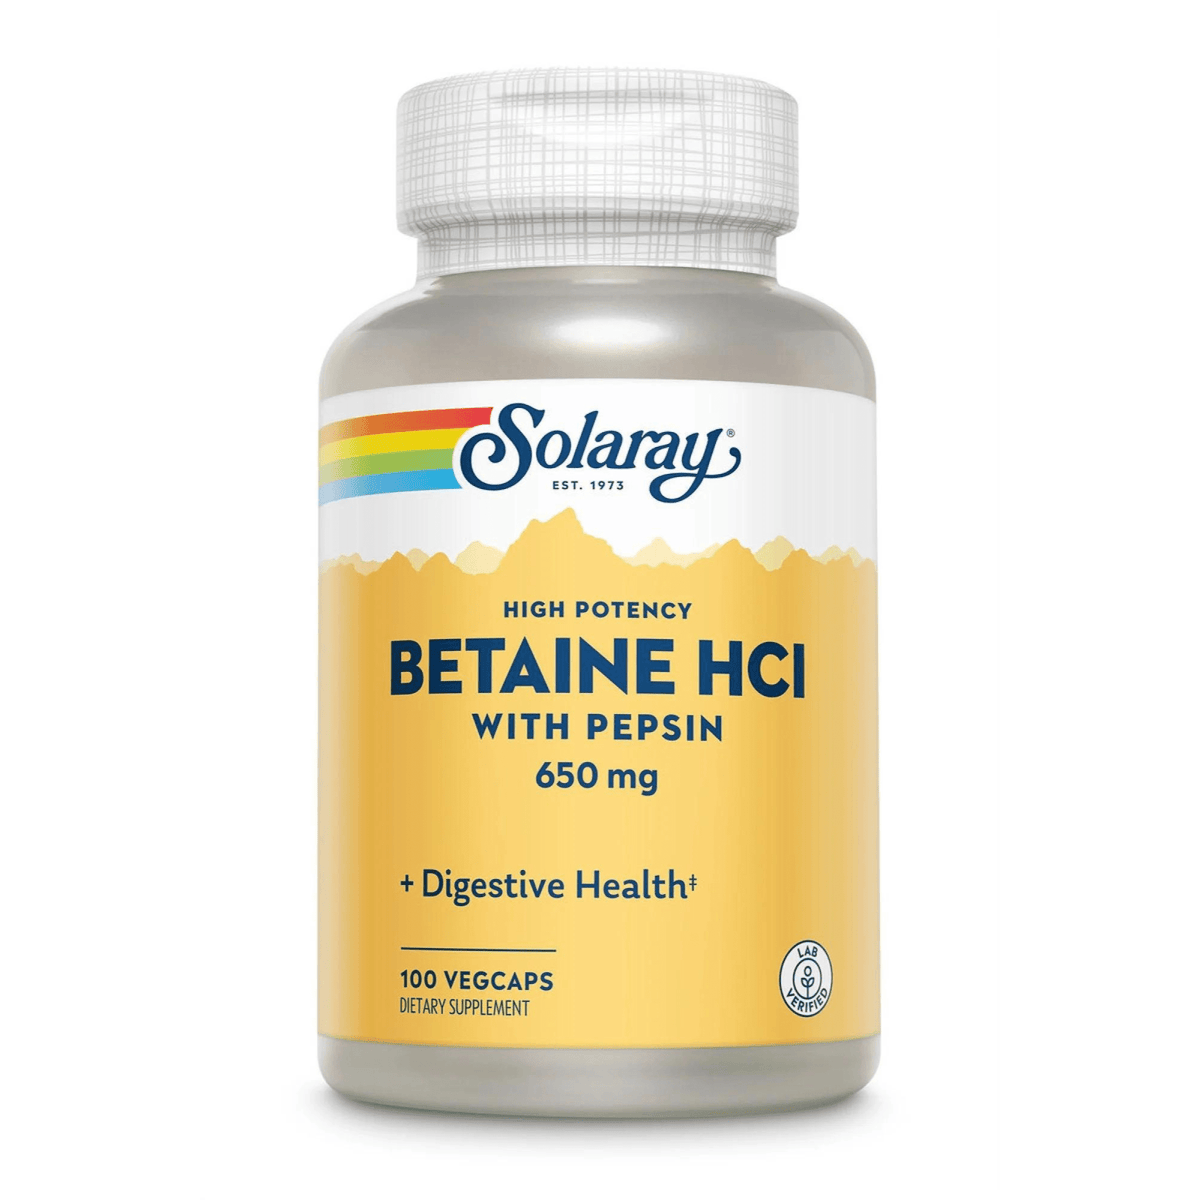 Primary Image of Betaine HCL with Pepsin 650 mg